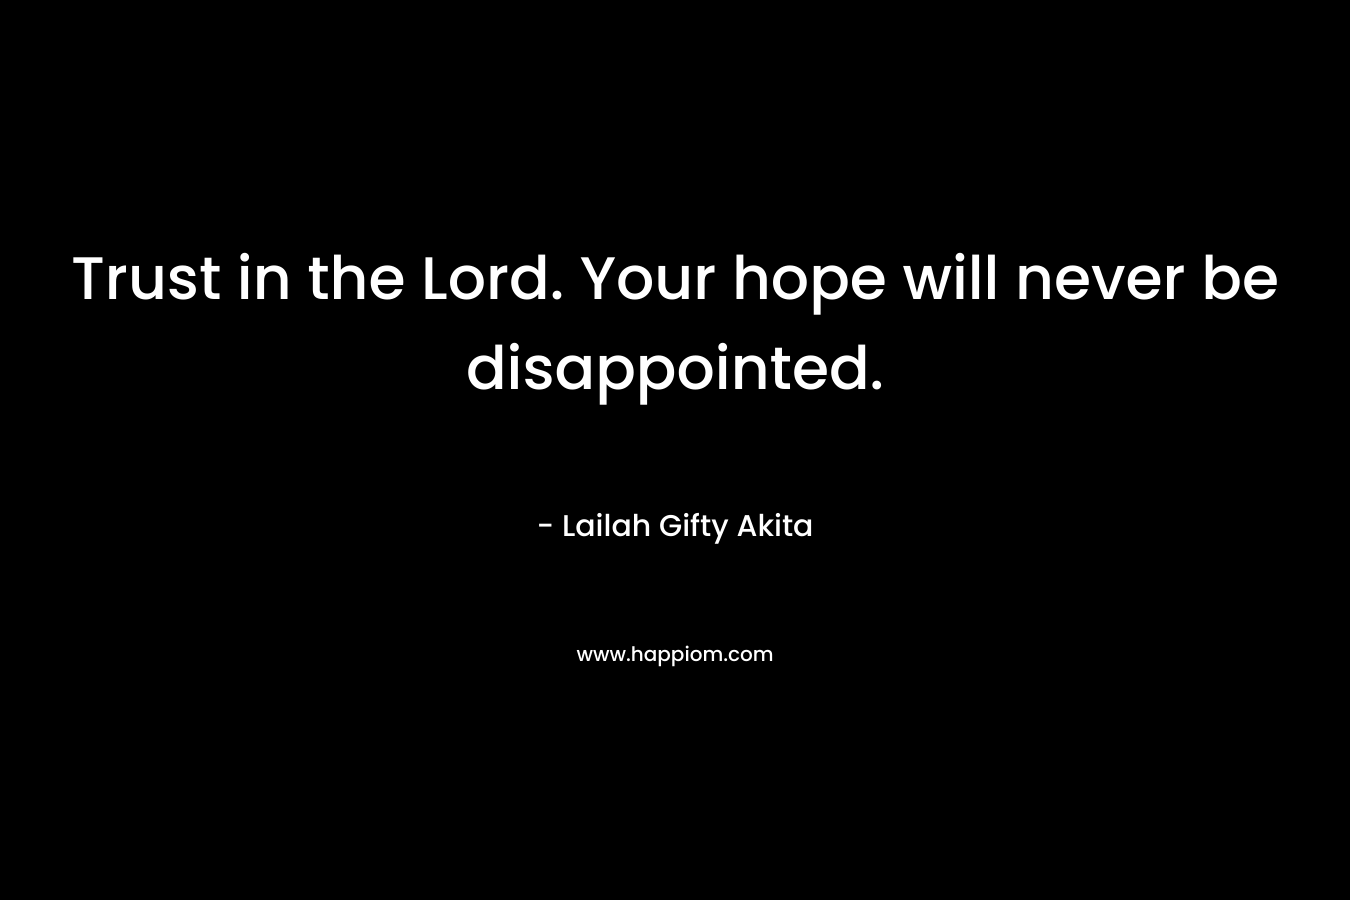 Trust in the Lord. Your hope will never be disappointed.